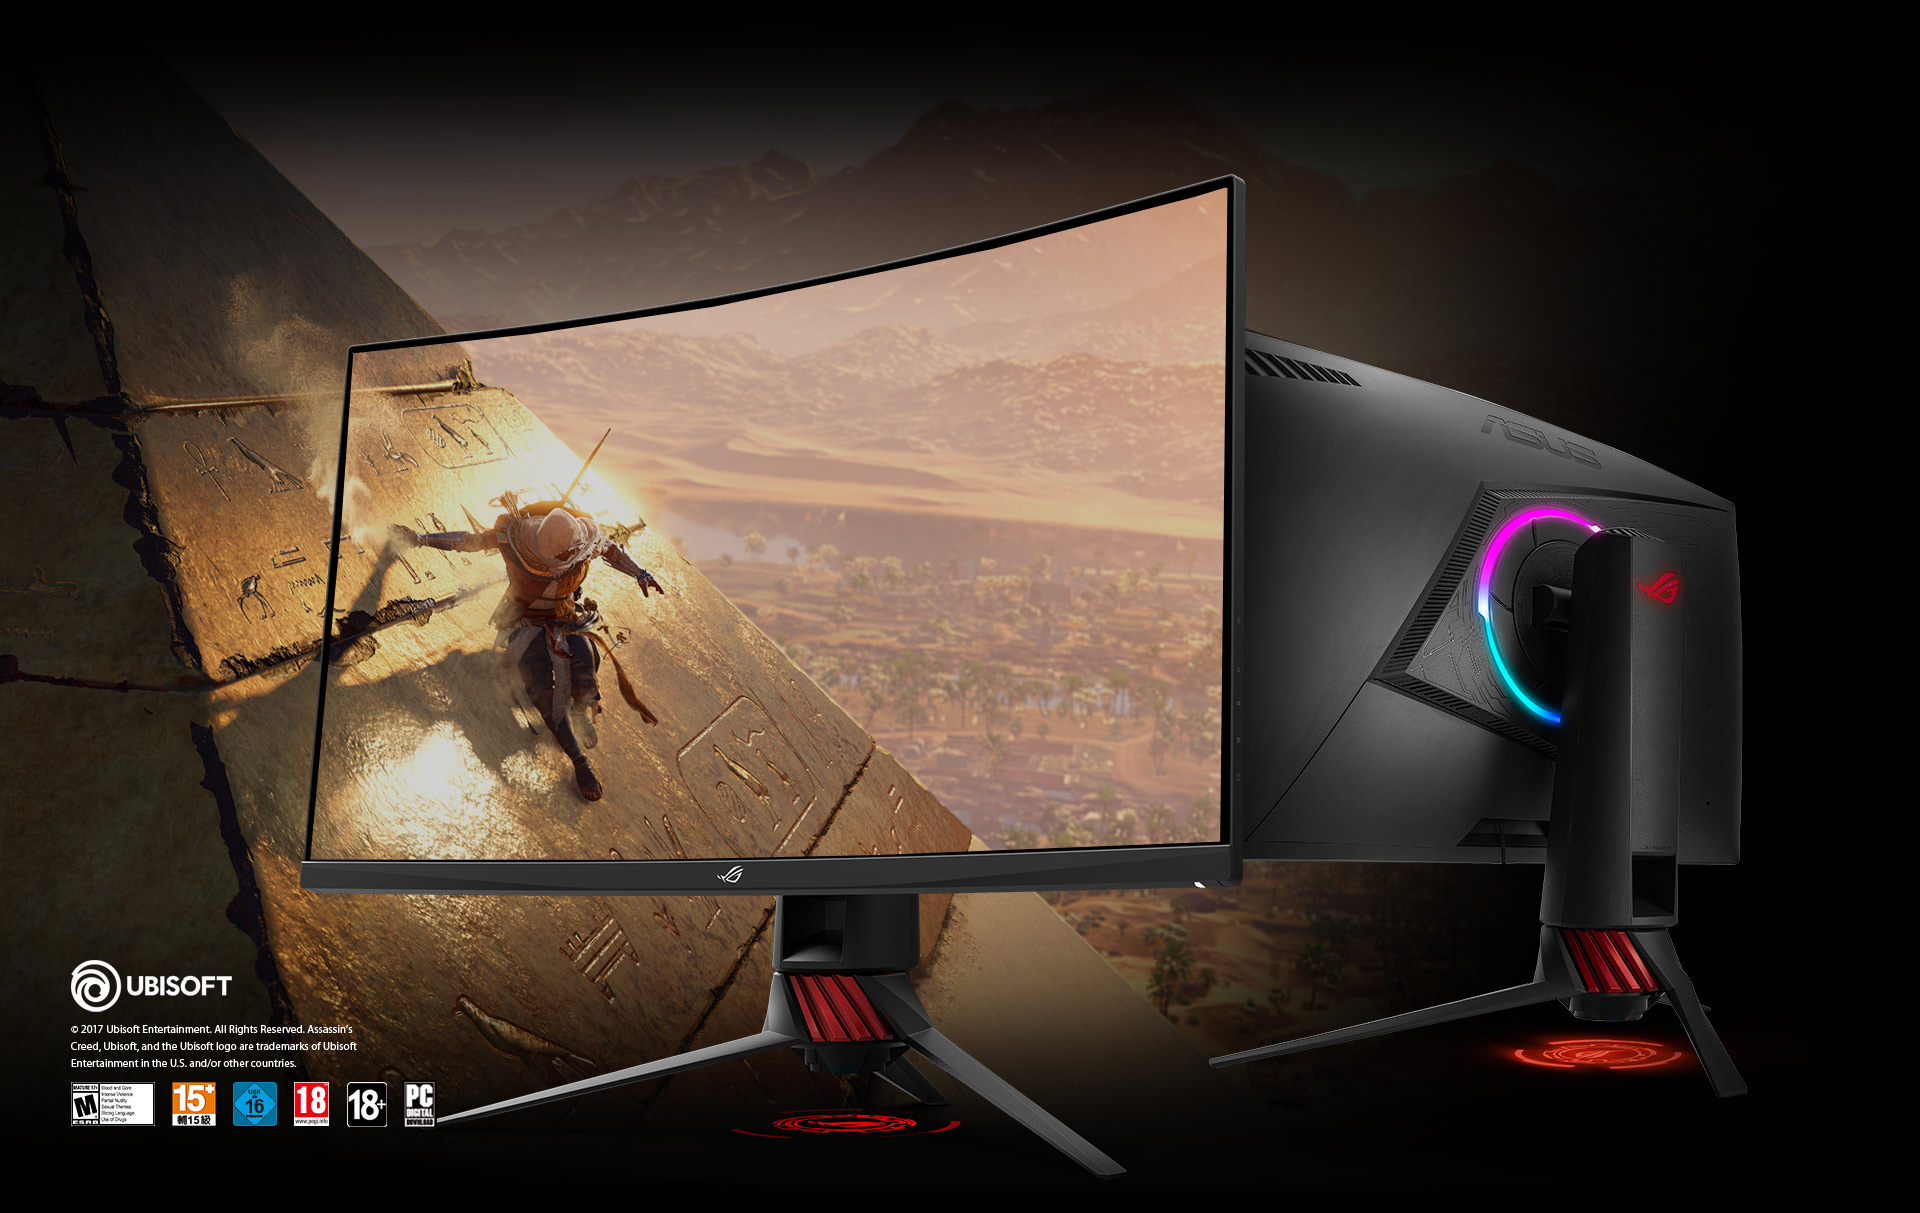 ASUS ROG Strix XG32VQ Review: Best 1440p Gaming Monitor?